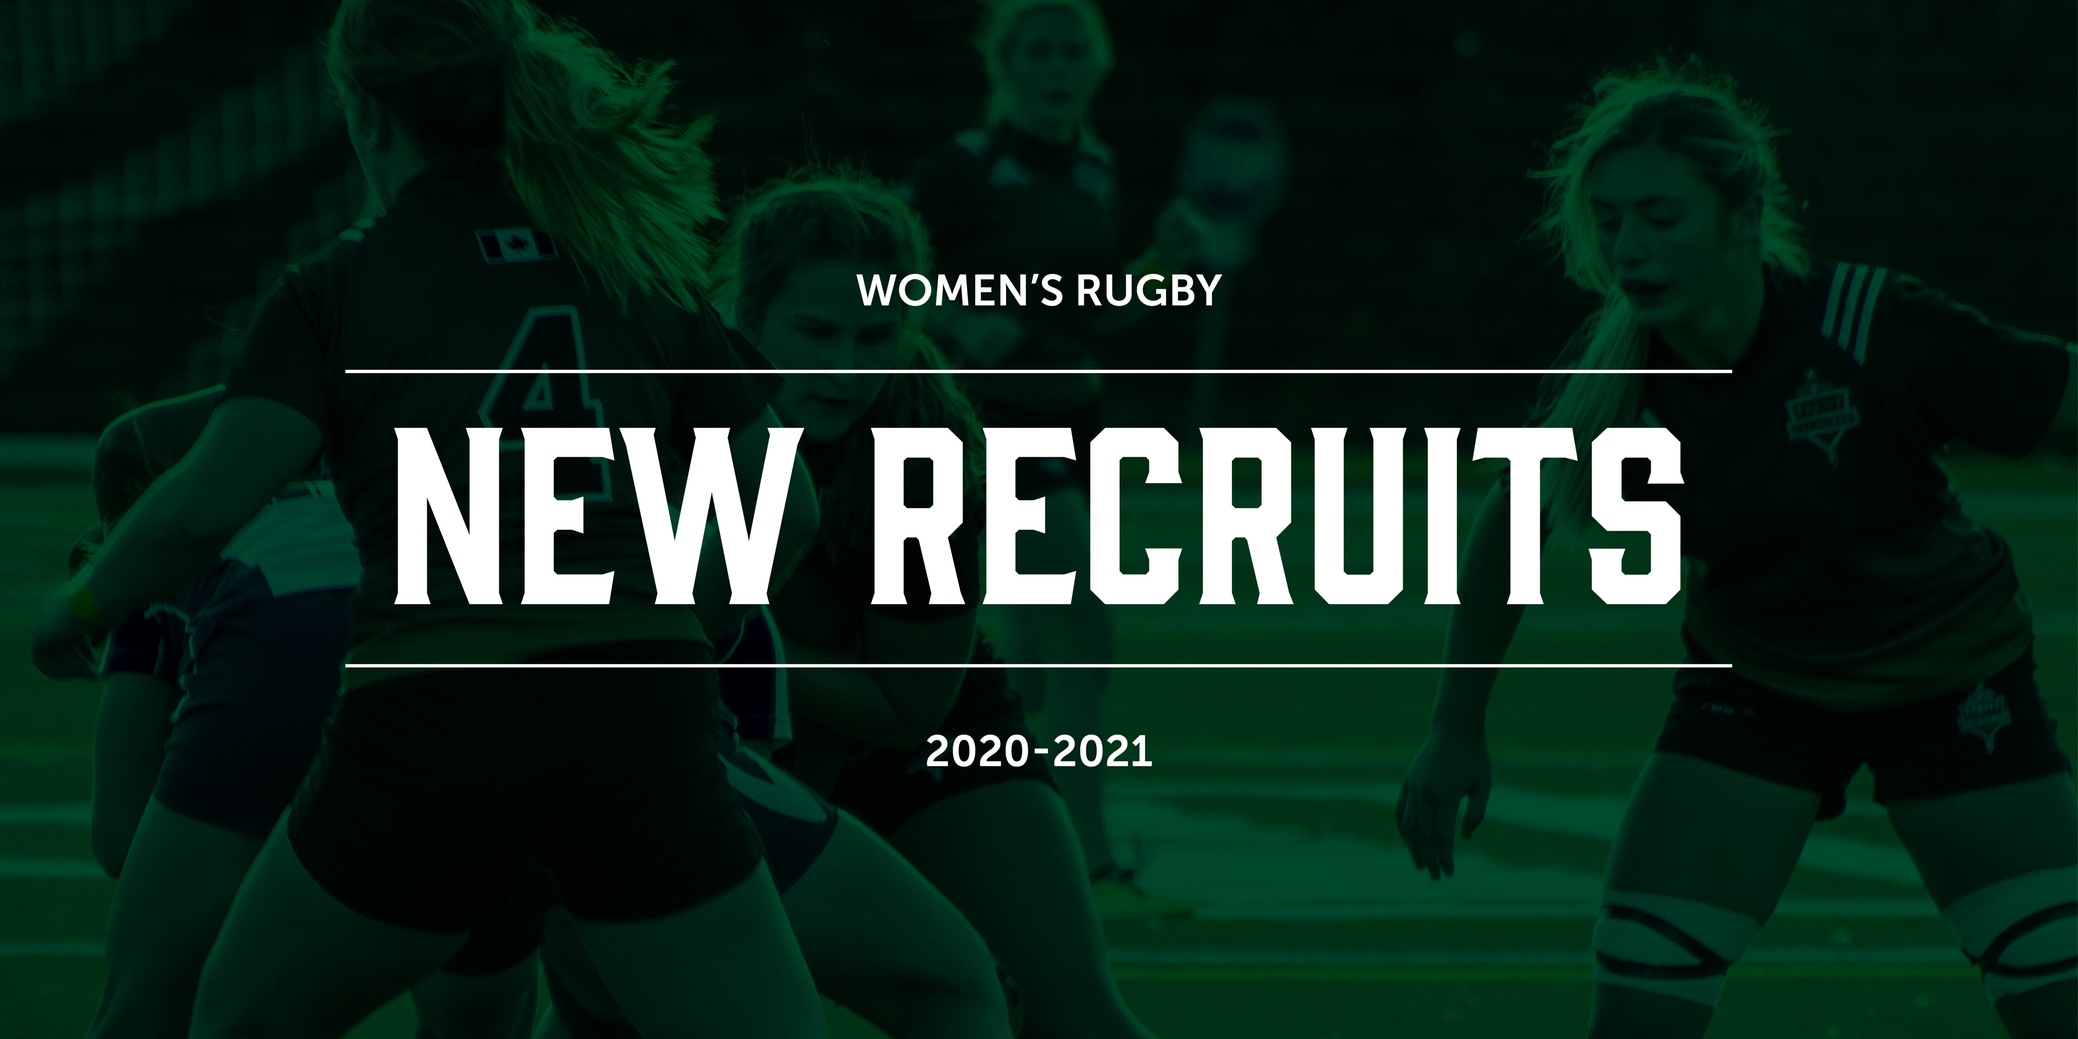 Women's Rugby New Recruits 2020-2021